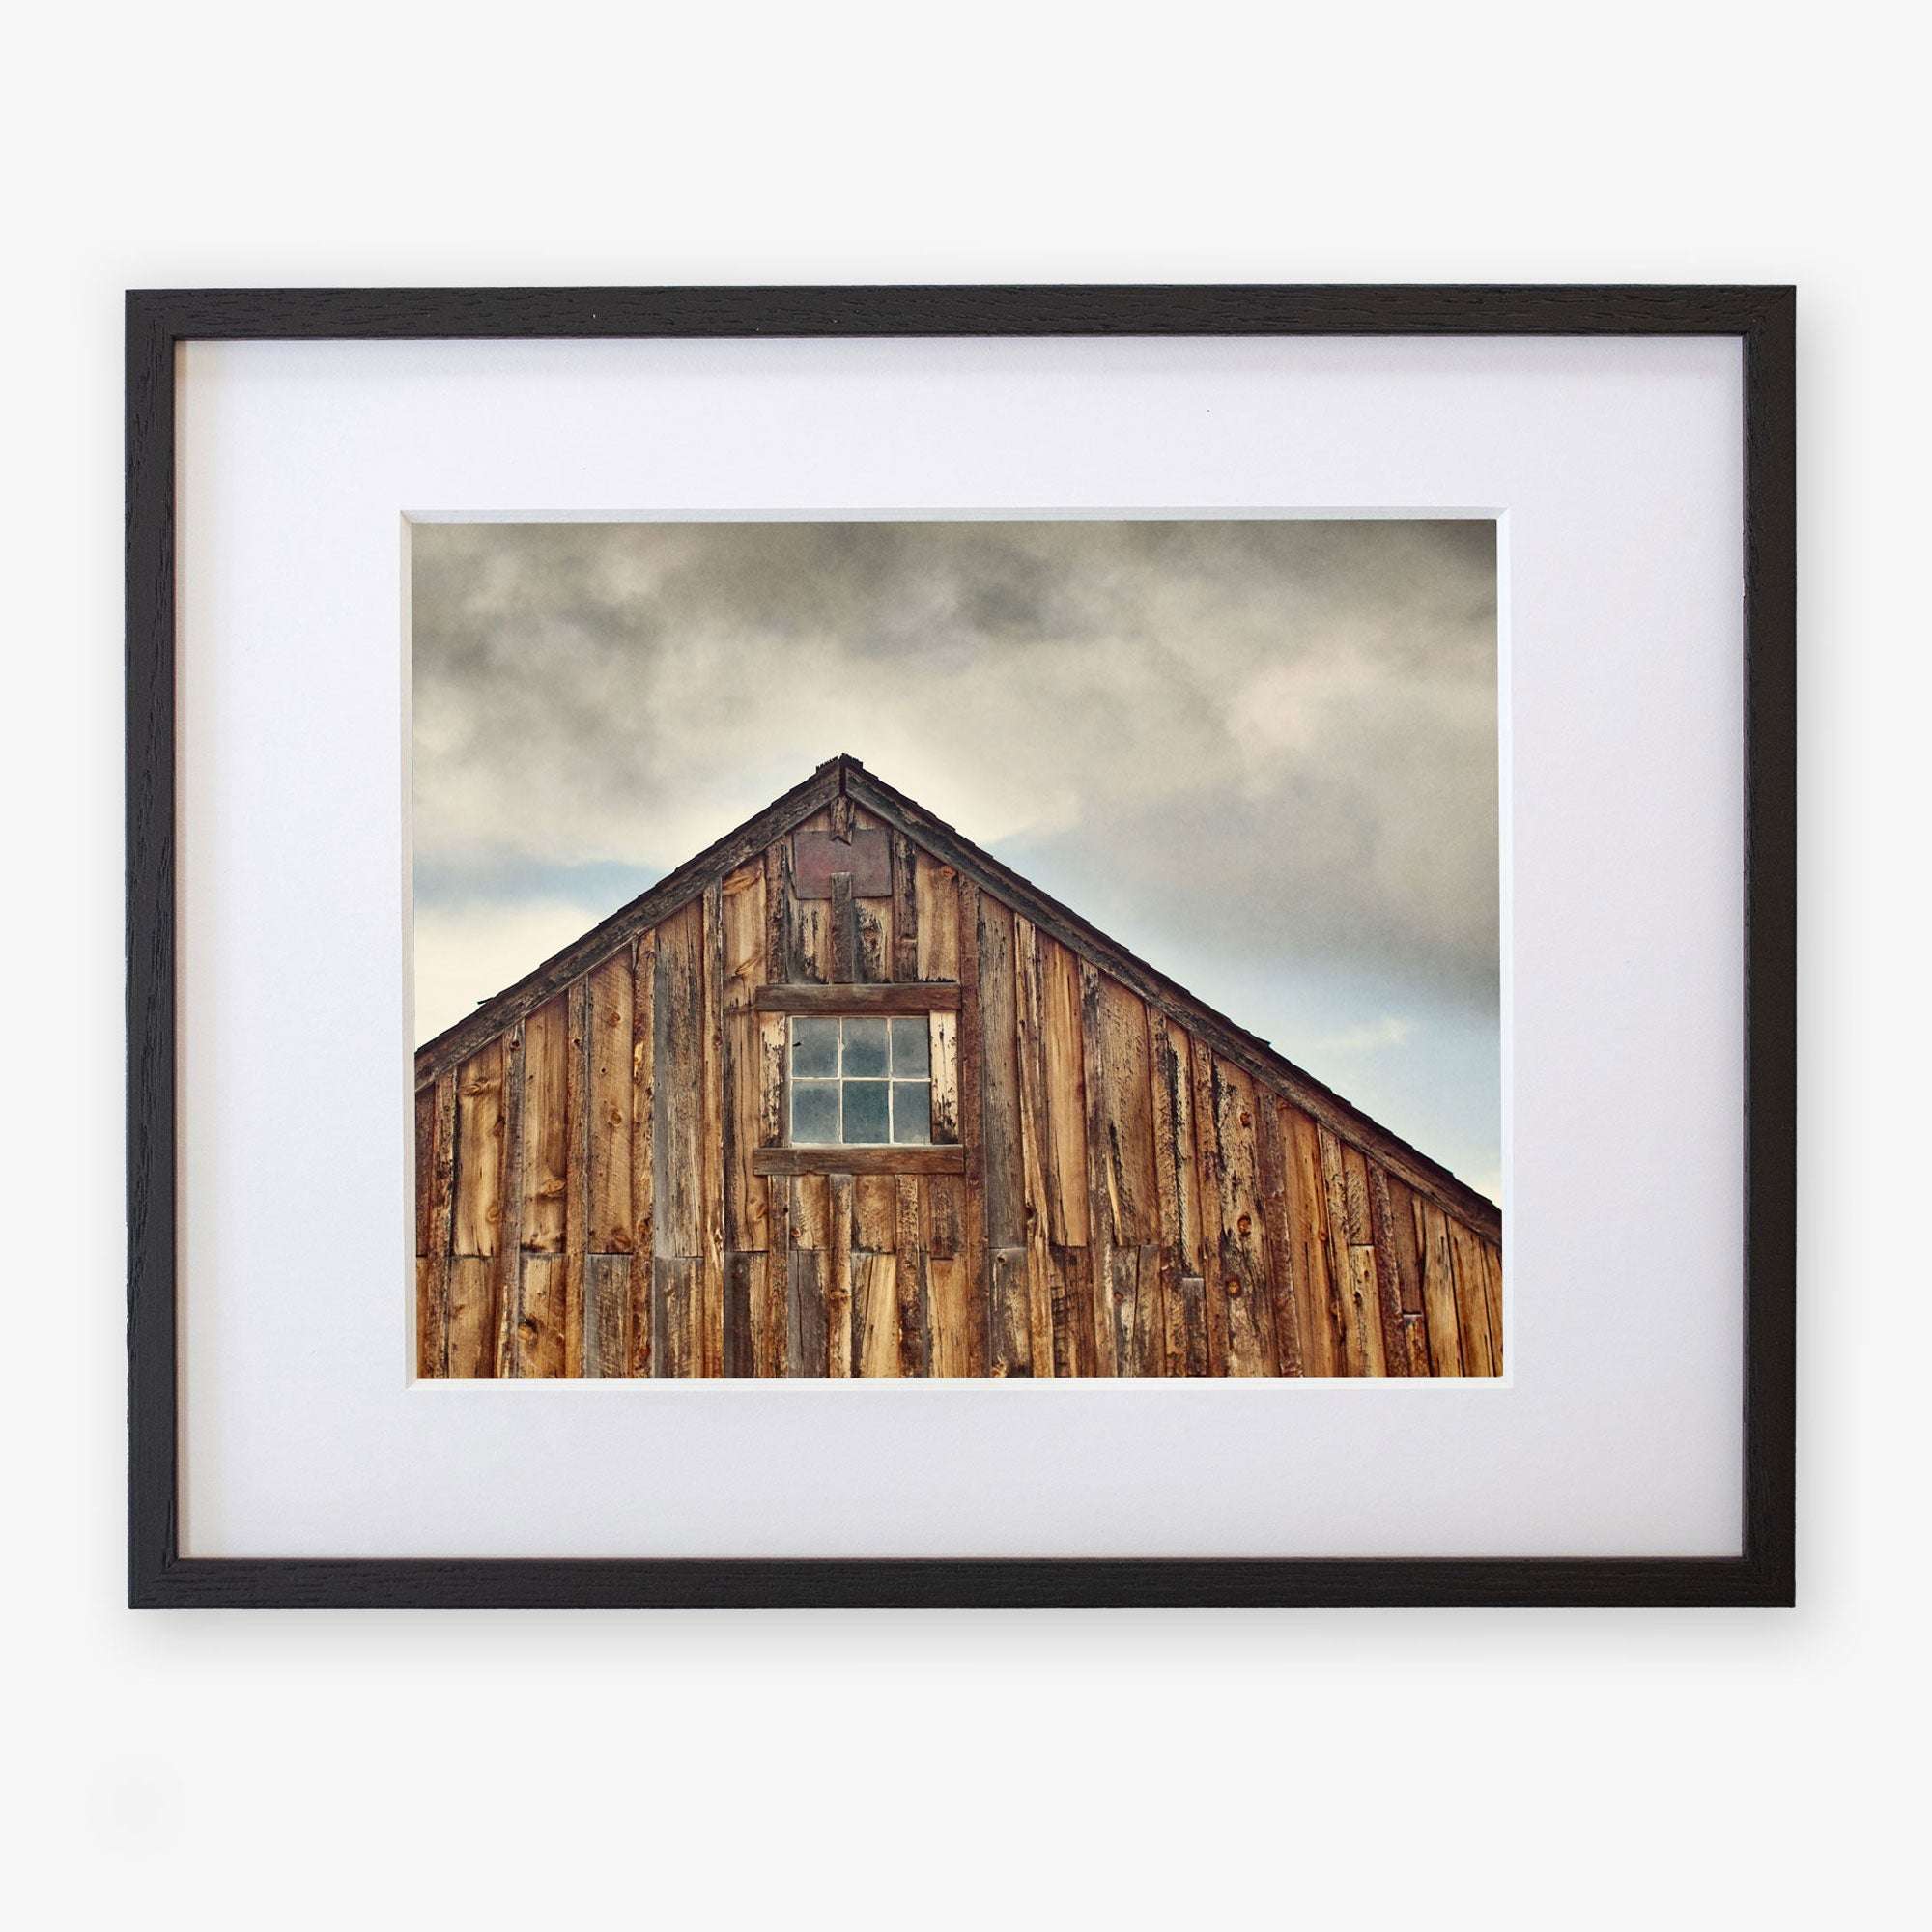 A framed photograph of an Offley Green Farmhouse Rustic Print, &#39;Old Barn at Bodie&#39;, centered and mounted on archival photographic paper, on a white gallery wall. The barn has weathered planks and a single window.